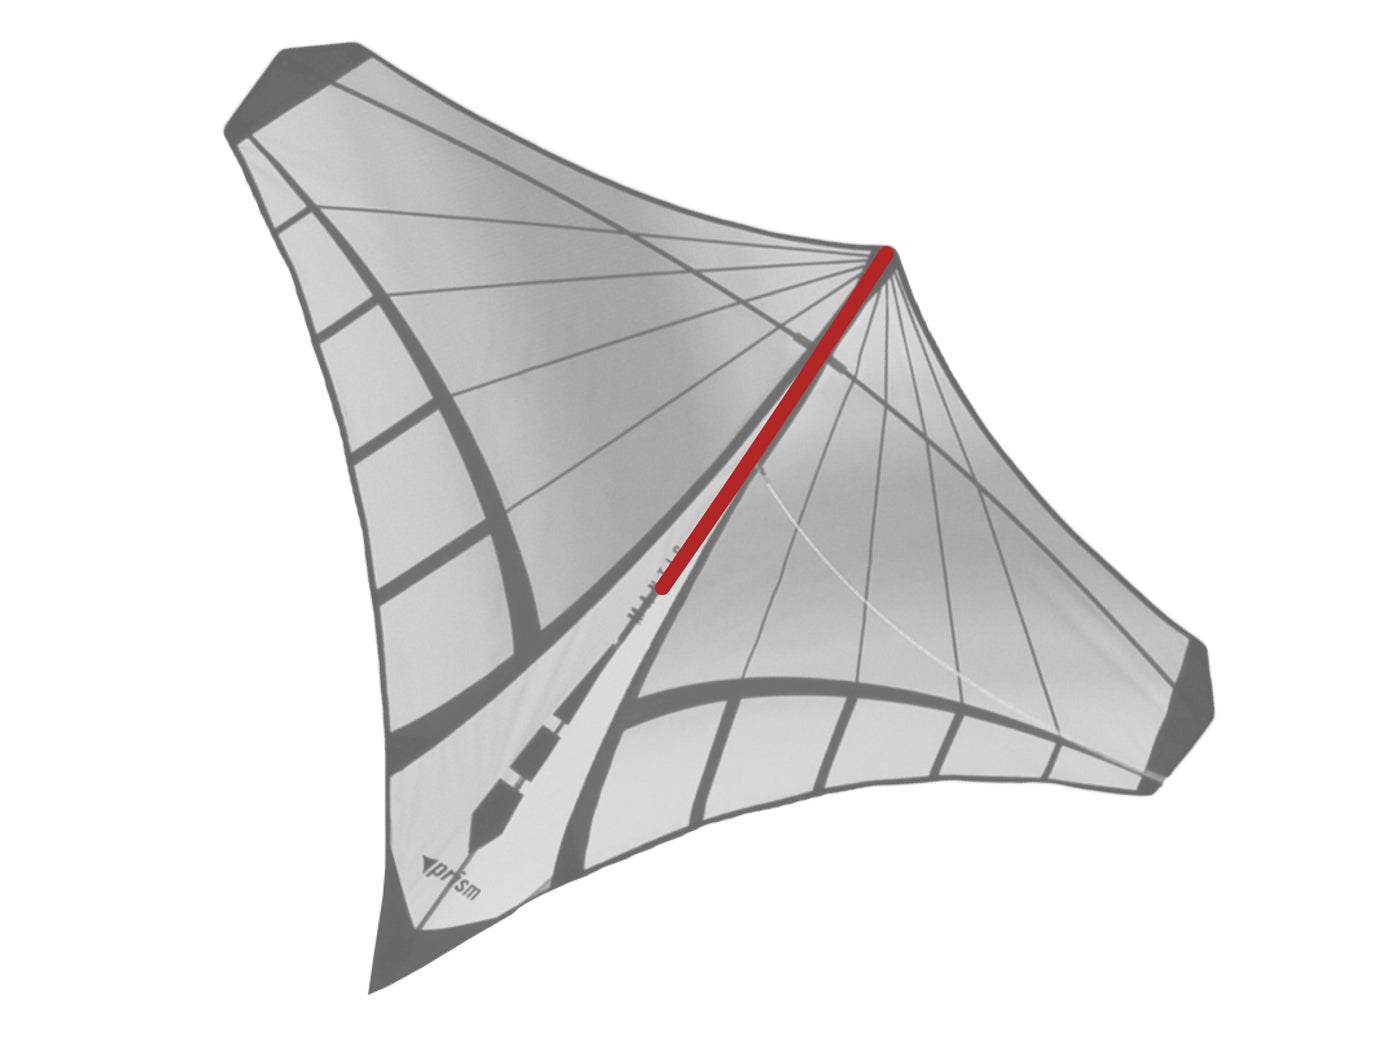 Diagram showing location of the Mantis Nose Spine on the kite.